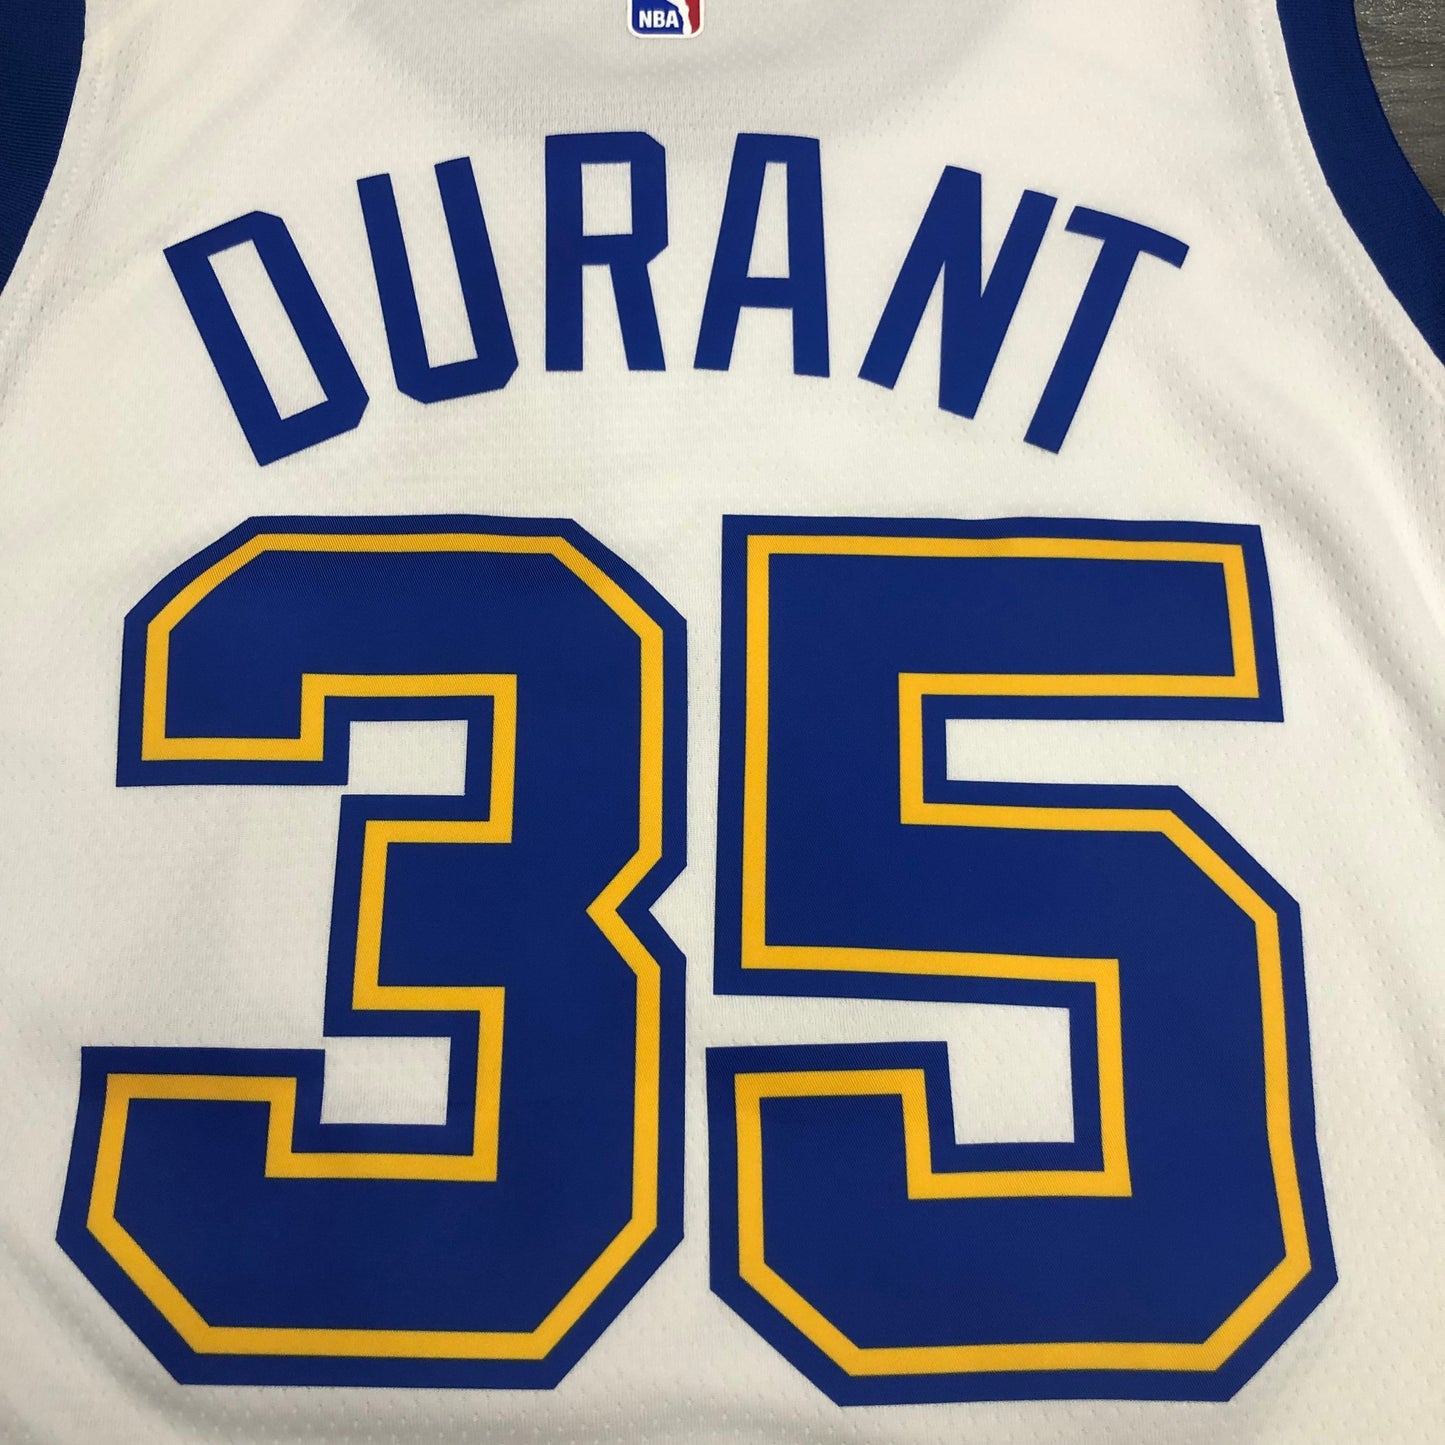 Golden State Warriors 2017/18 Kevin Durant Throwback Classic White NBA Swingman Jersey